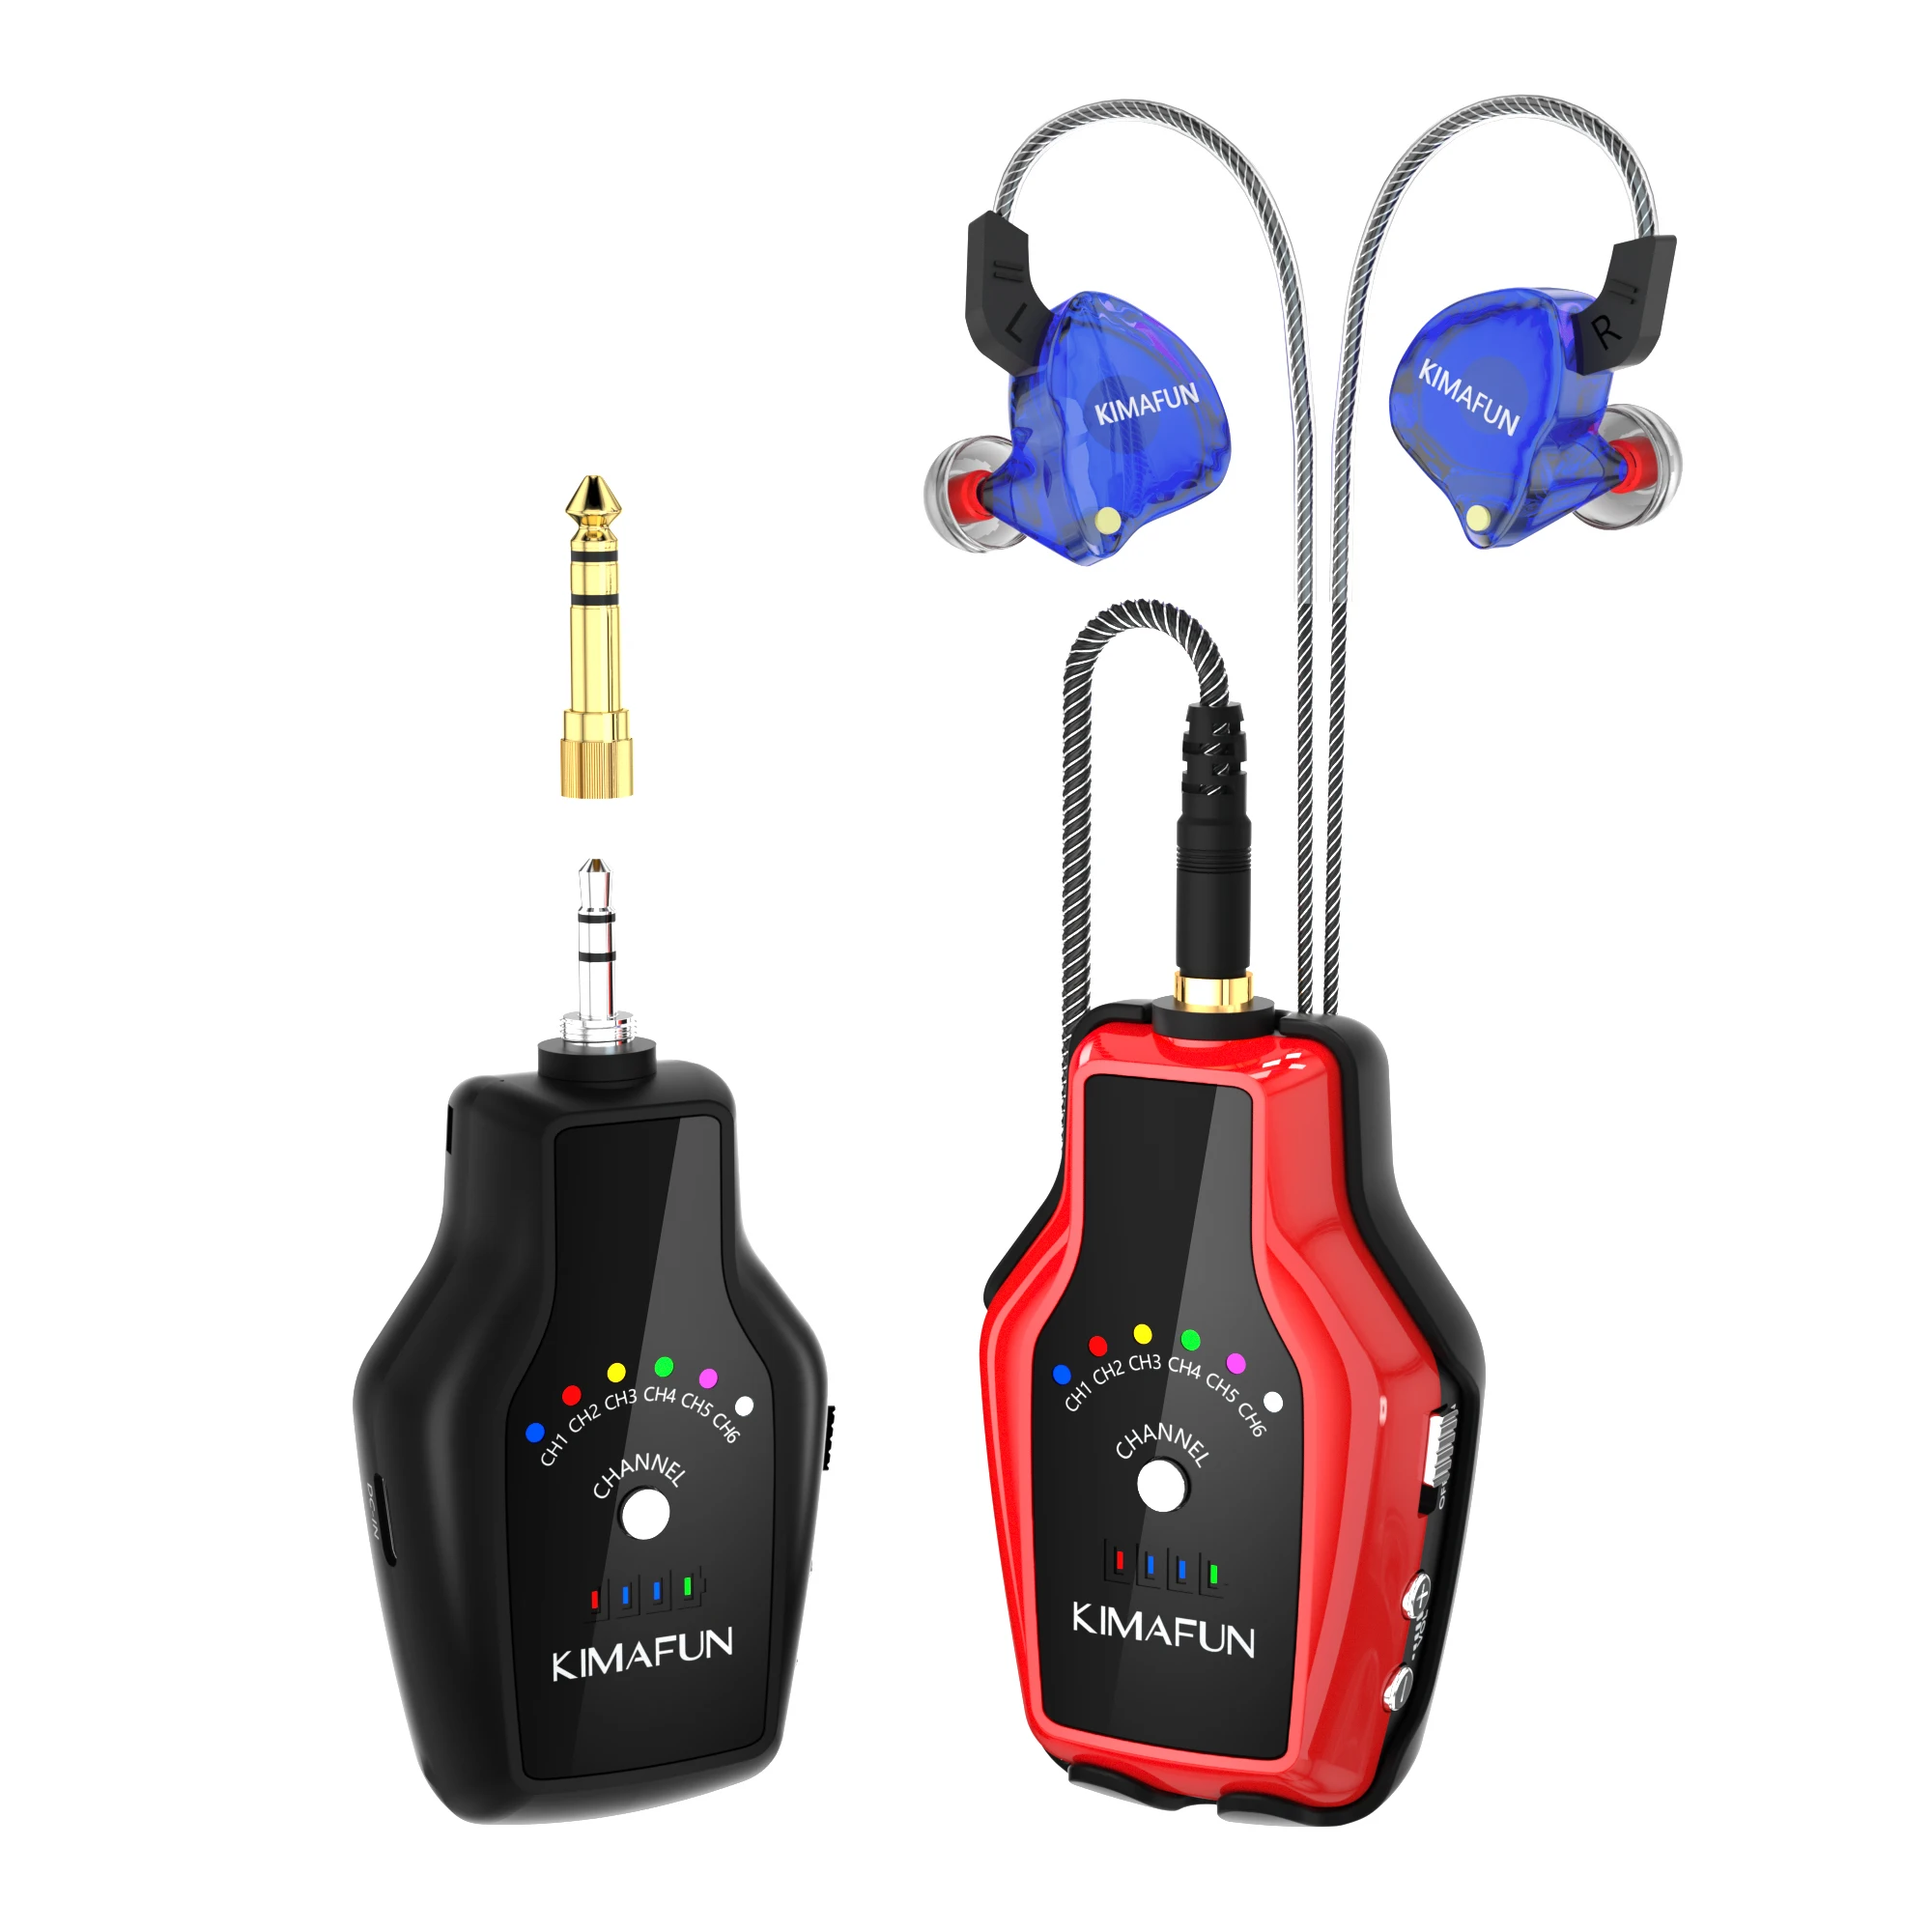 2.4G Wireless in-Ear Monitor System With Transmitter and Beltpack Receiver for Stage Performance,Band Rehearsal,Camera Record enlarge